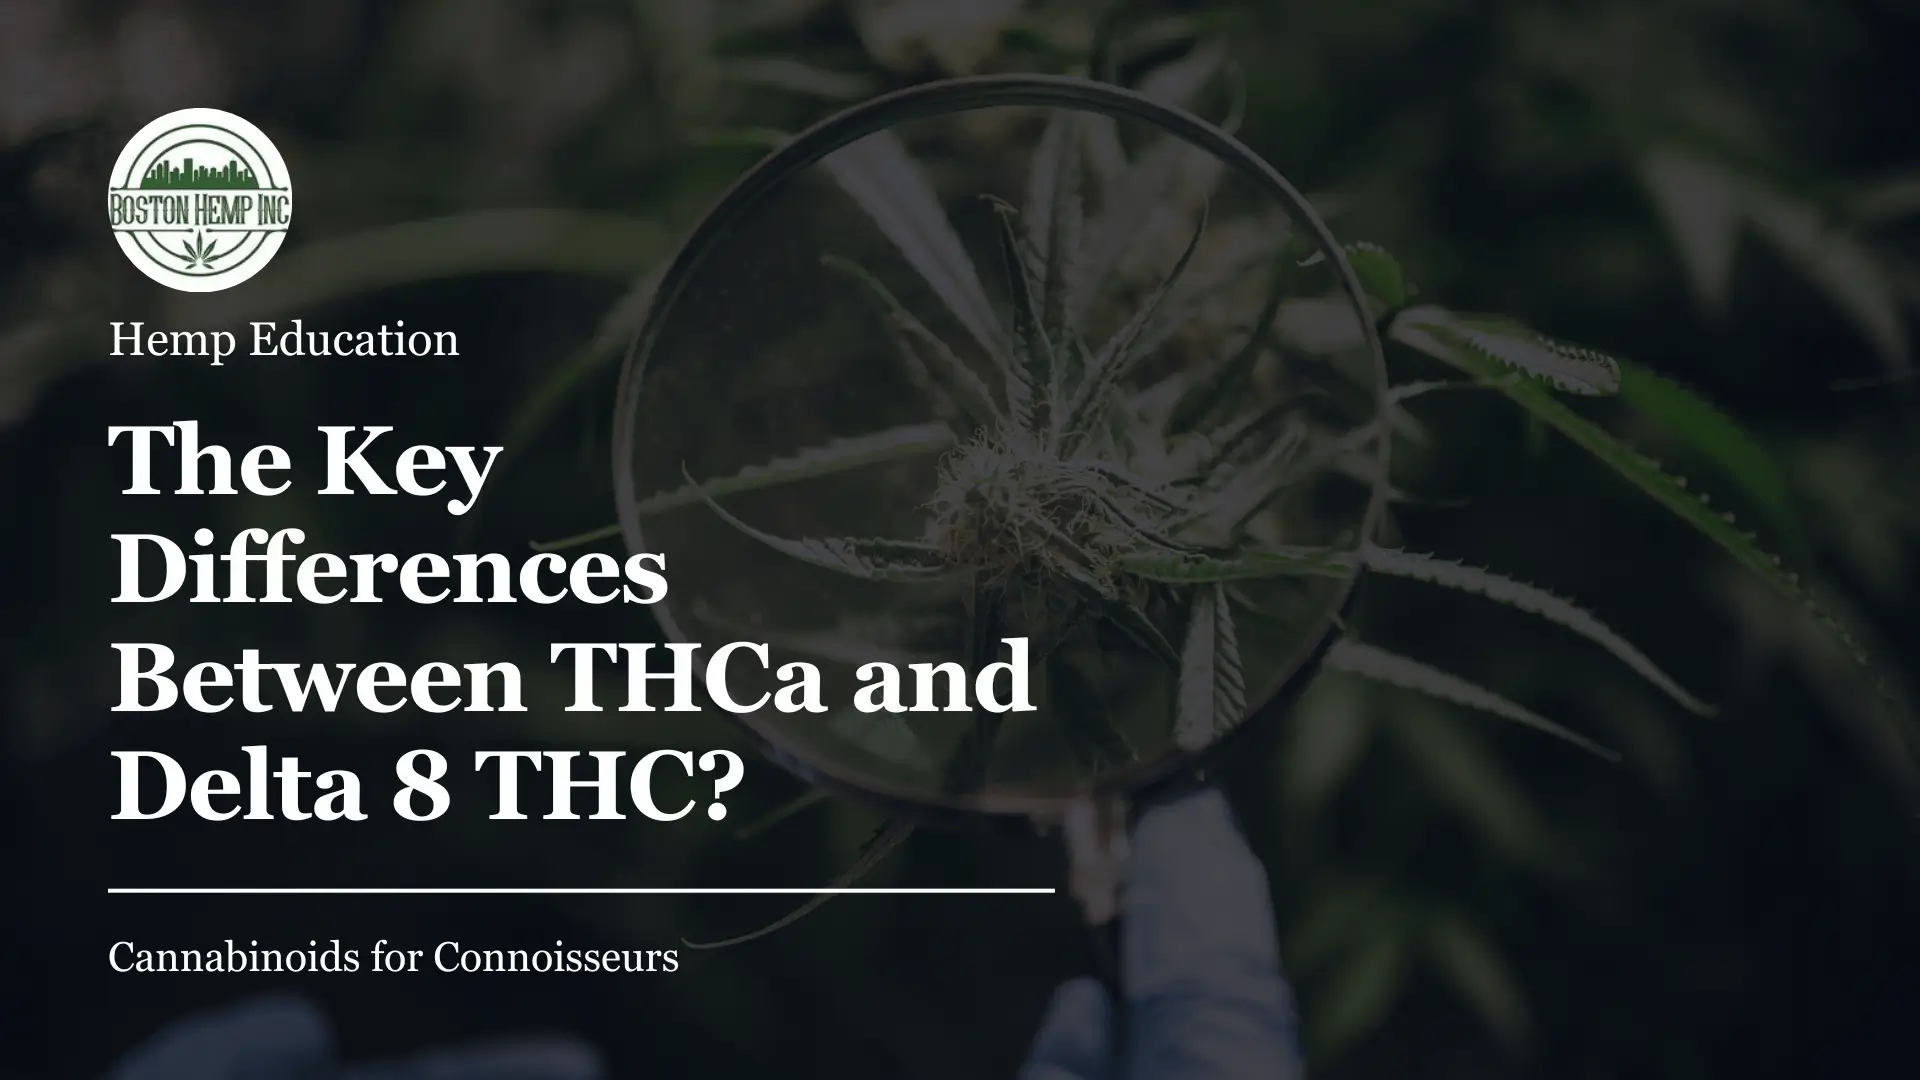 What Are the Key Differences Between THCa and Delta 8 THC